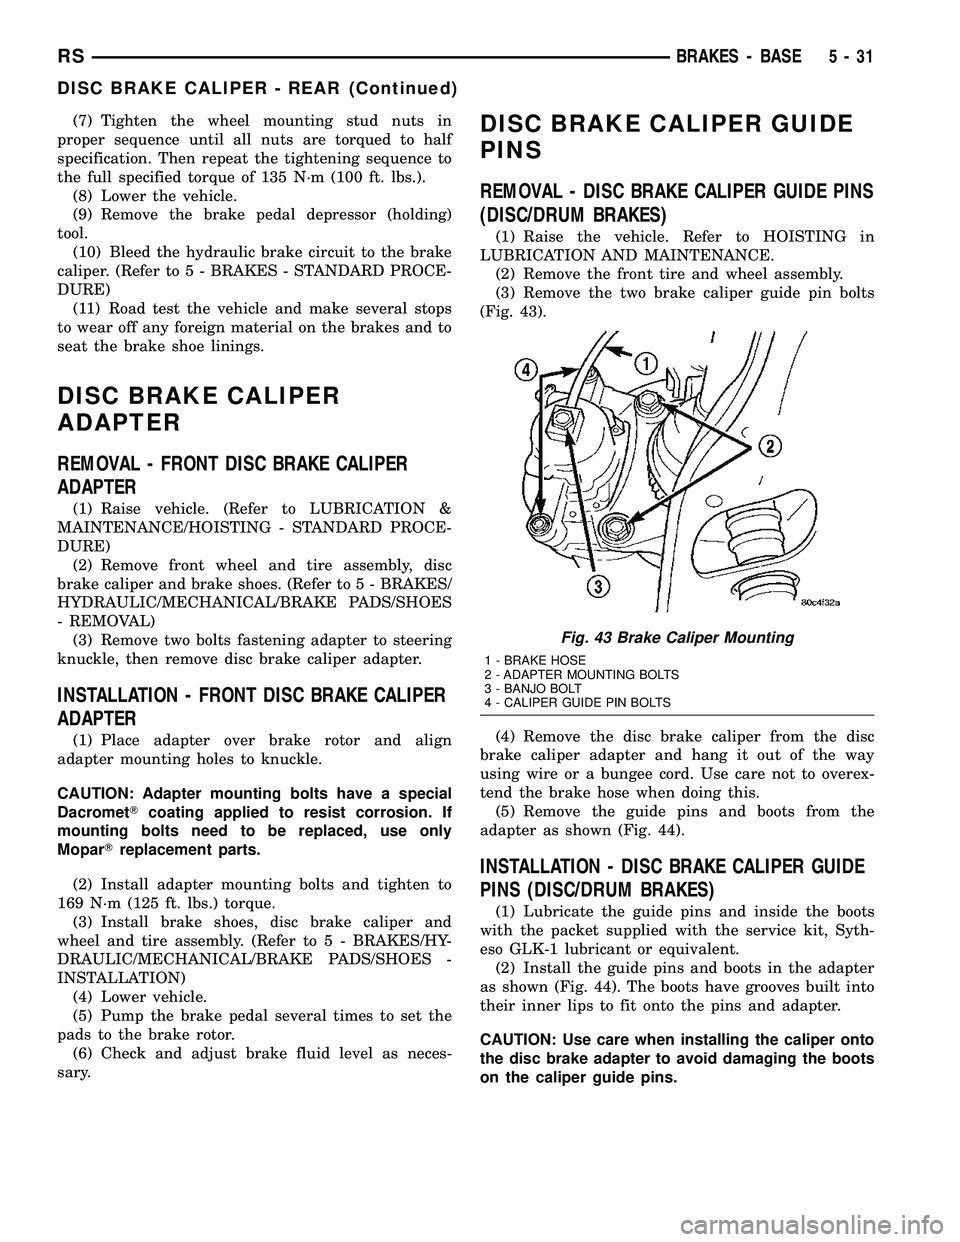 DODGE TOWN AND COUNTRY 2004  Service Manual (7) Tighten the wheel mounting stud nuts in
proper sequence until all nuts are torqued to half
specification. Then repeat the tightening sequence to
the full specified torque of 135 N´m (100 ft. lbs.